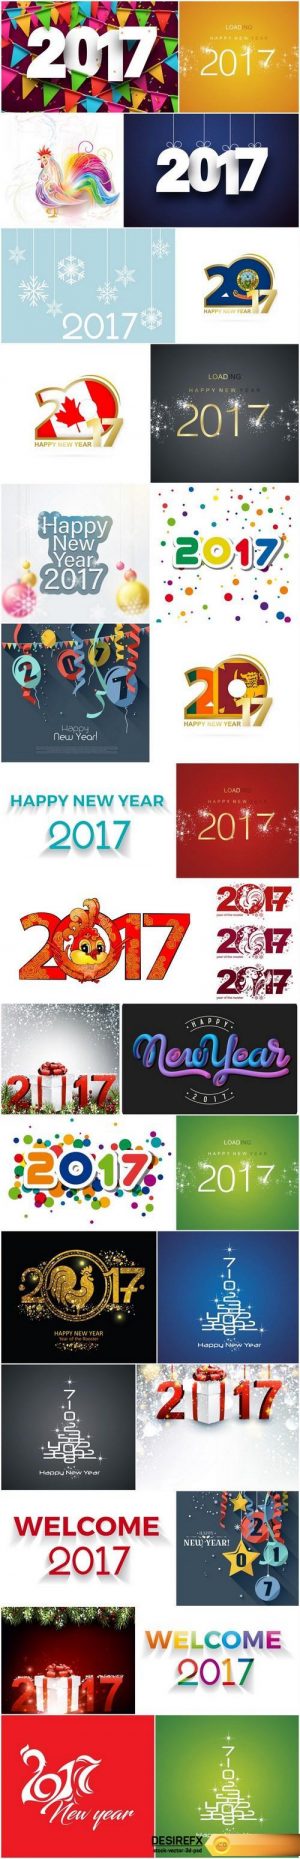 New Year Design 2017 part 8 – Set of 30xEPS Professional Vector Stock